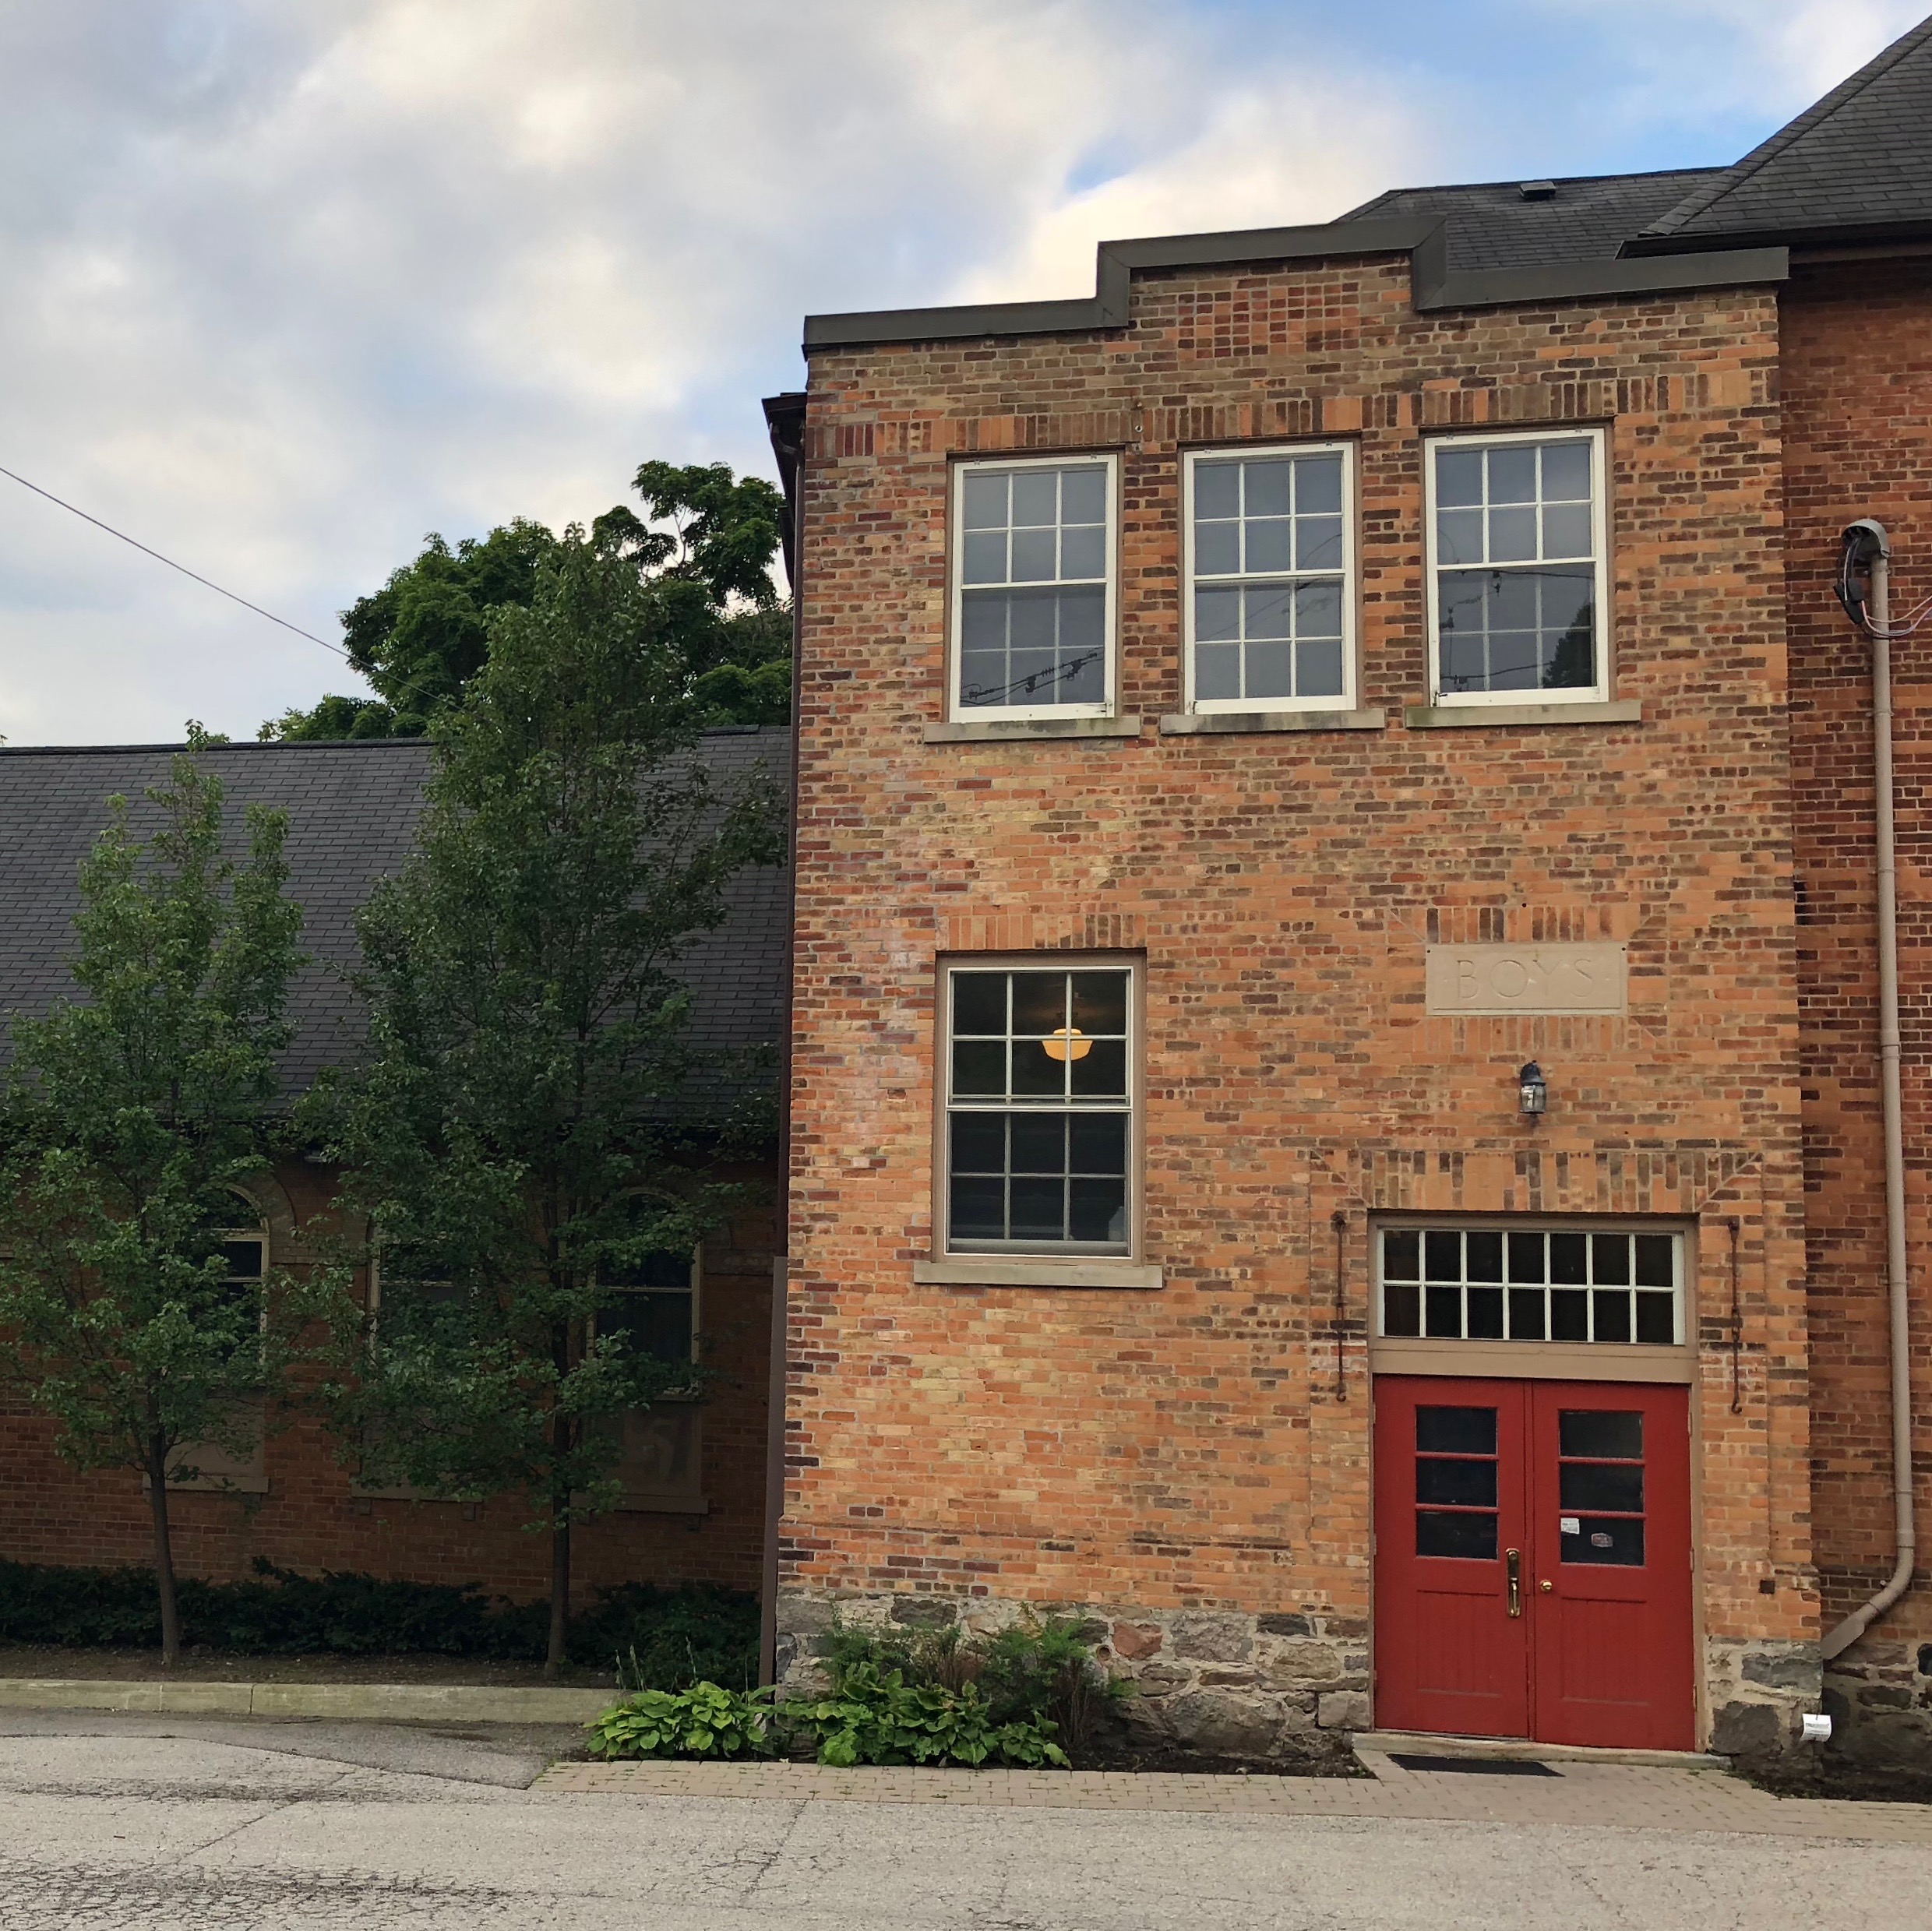 School house in Markham, Ontario that was turned into a coworking space